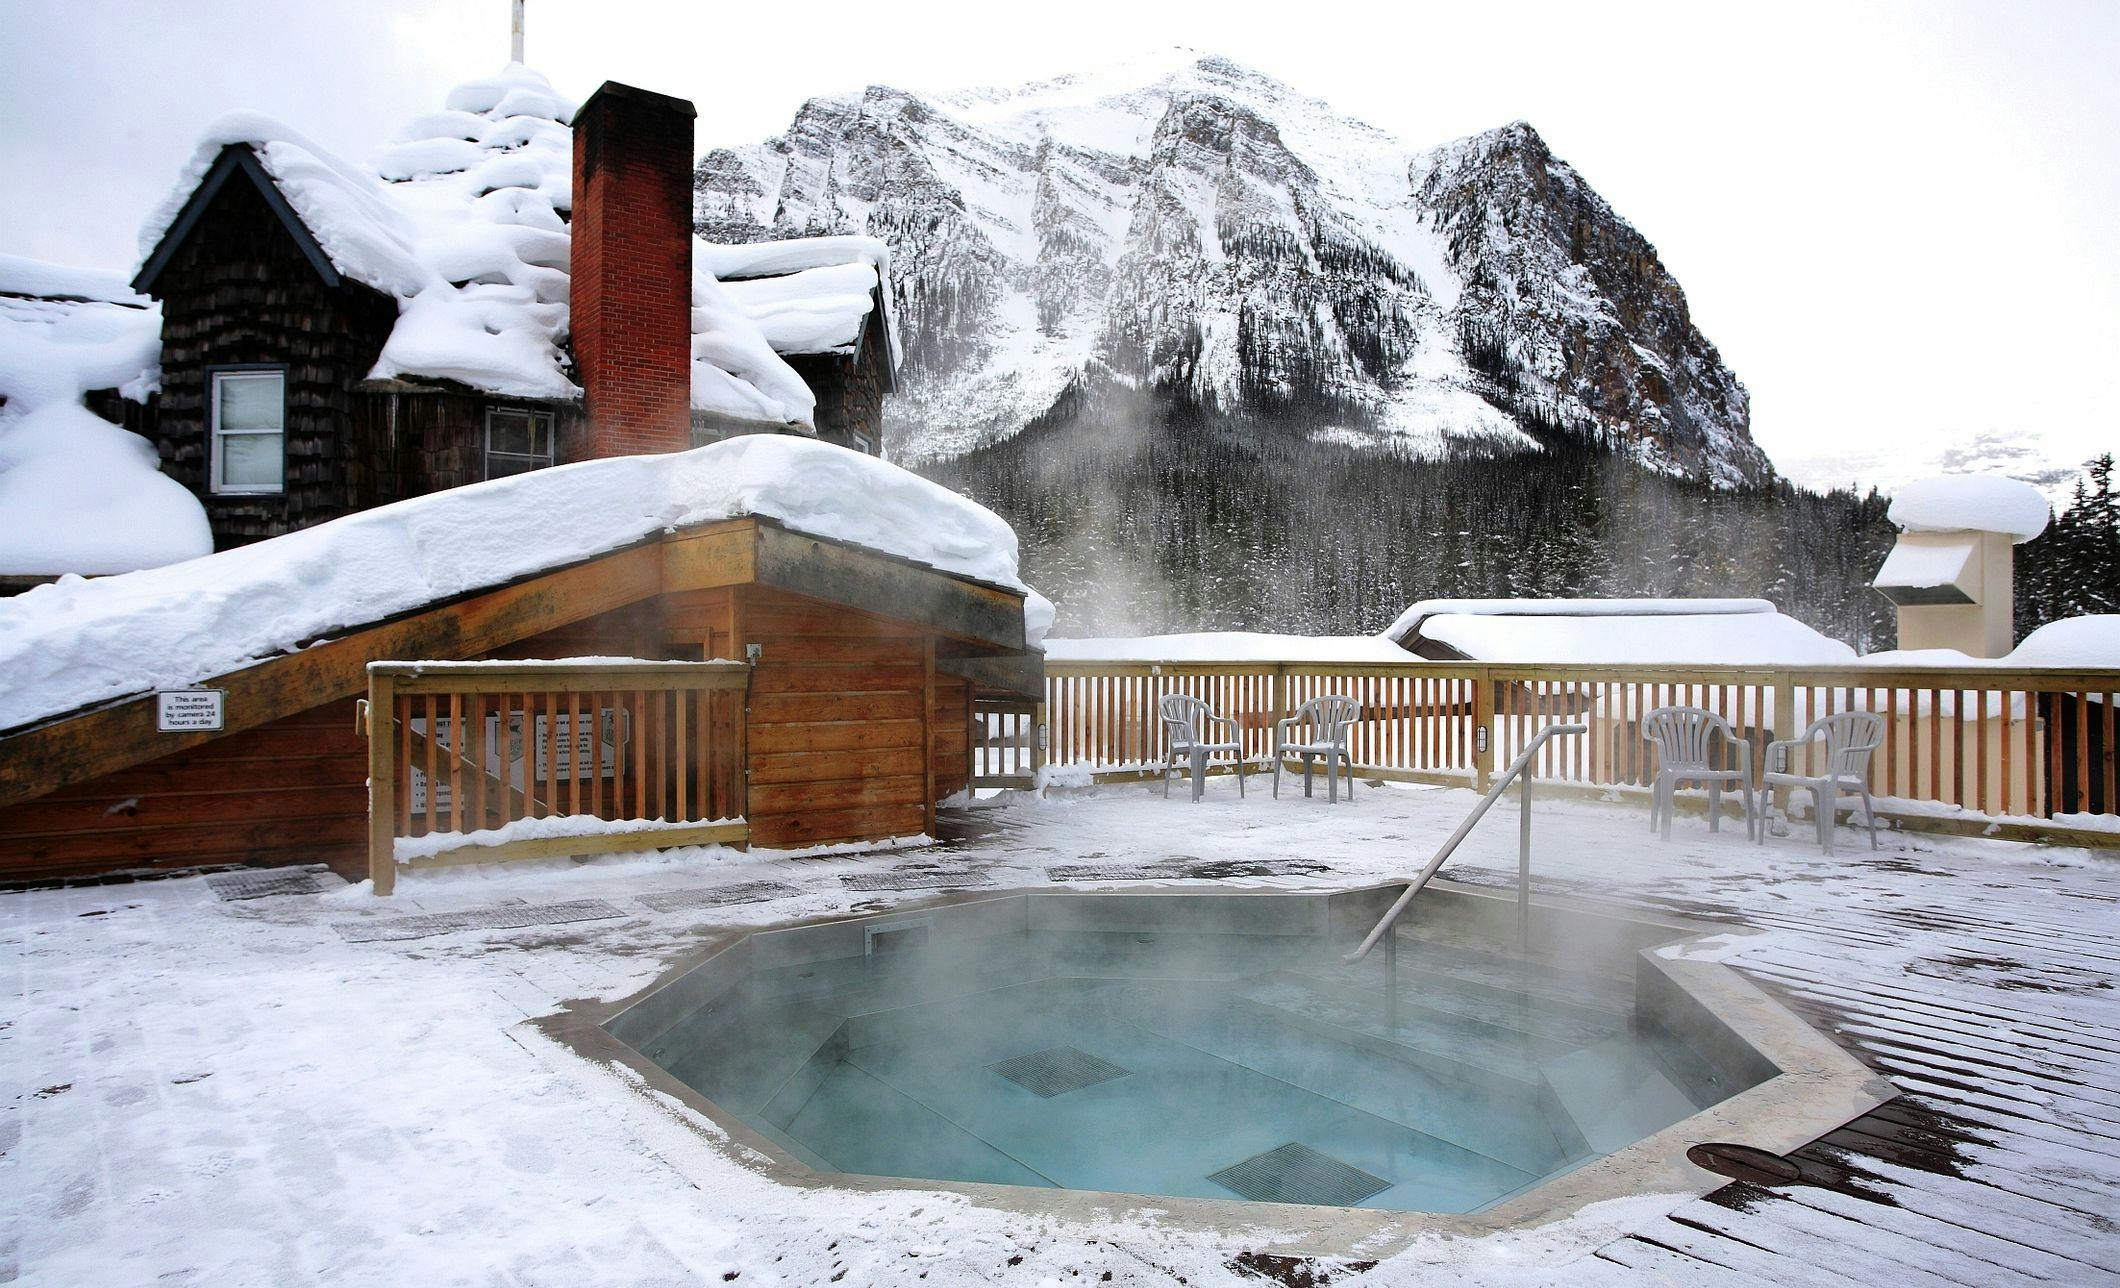 A rooftop hot tub in the winter with snow on the ground and snow-capped mountains